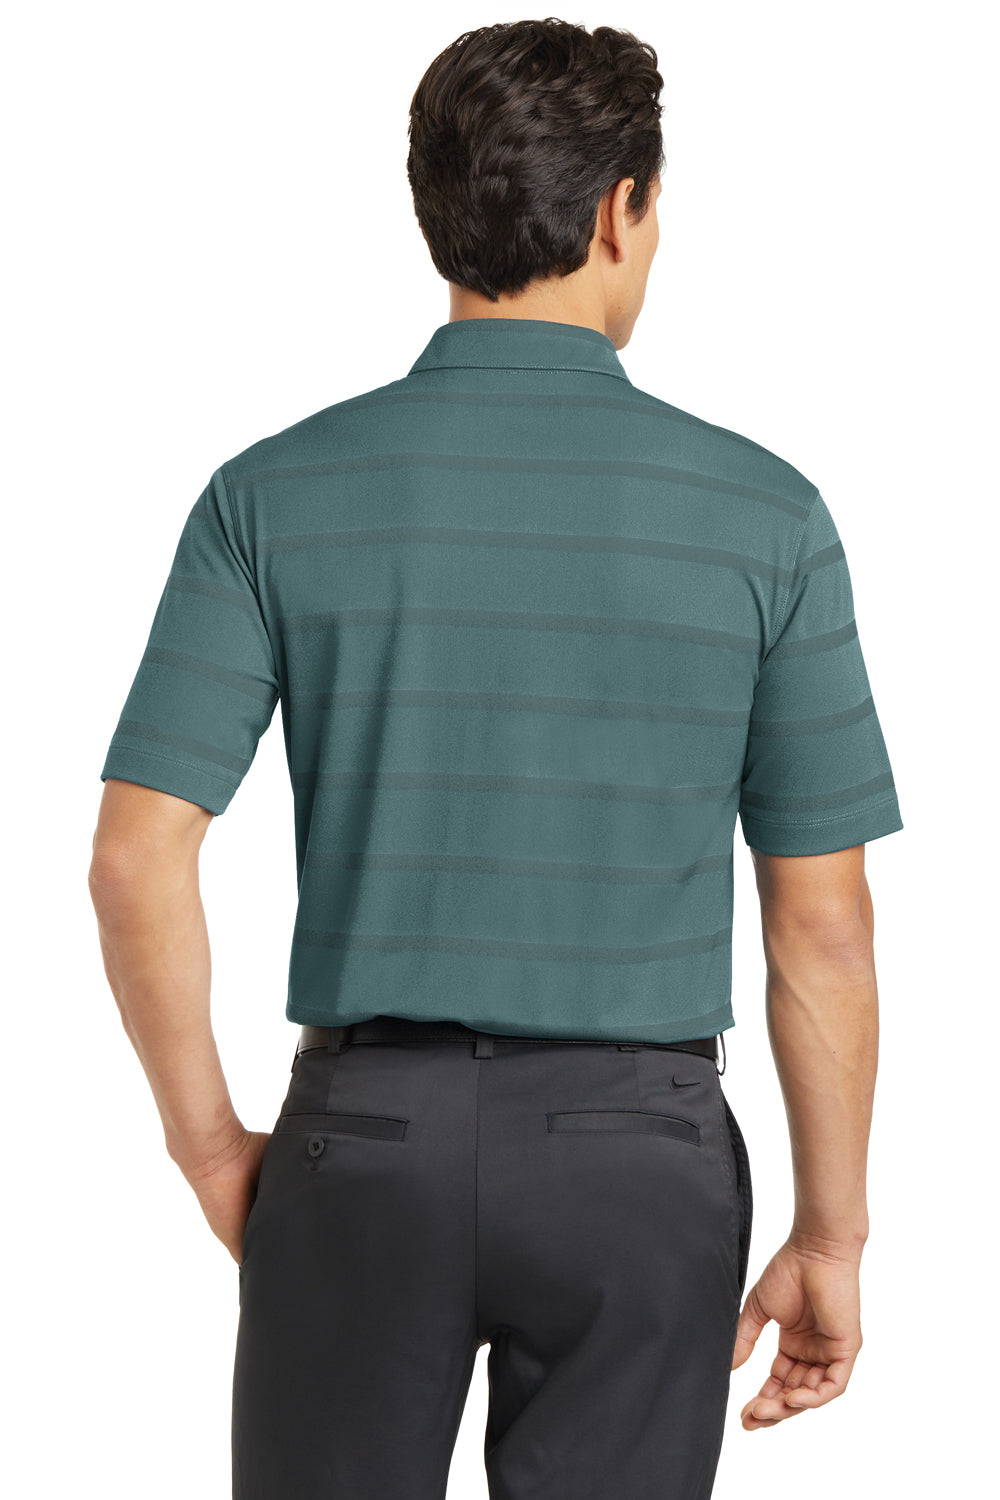 Nike 677786 Mens Dri-Fit Moisture Wicking Short Sleeve Polo Shirt Teal Green/Anthracite Grey Back